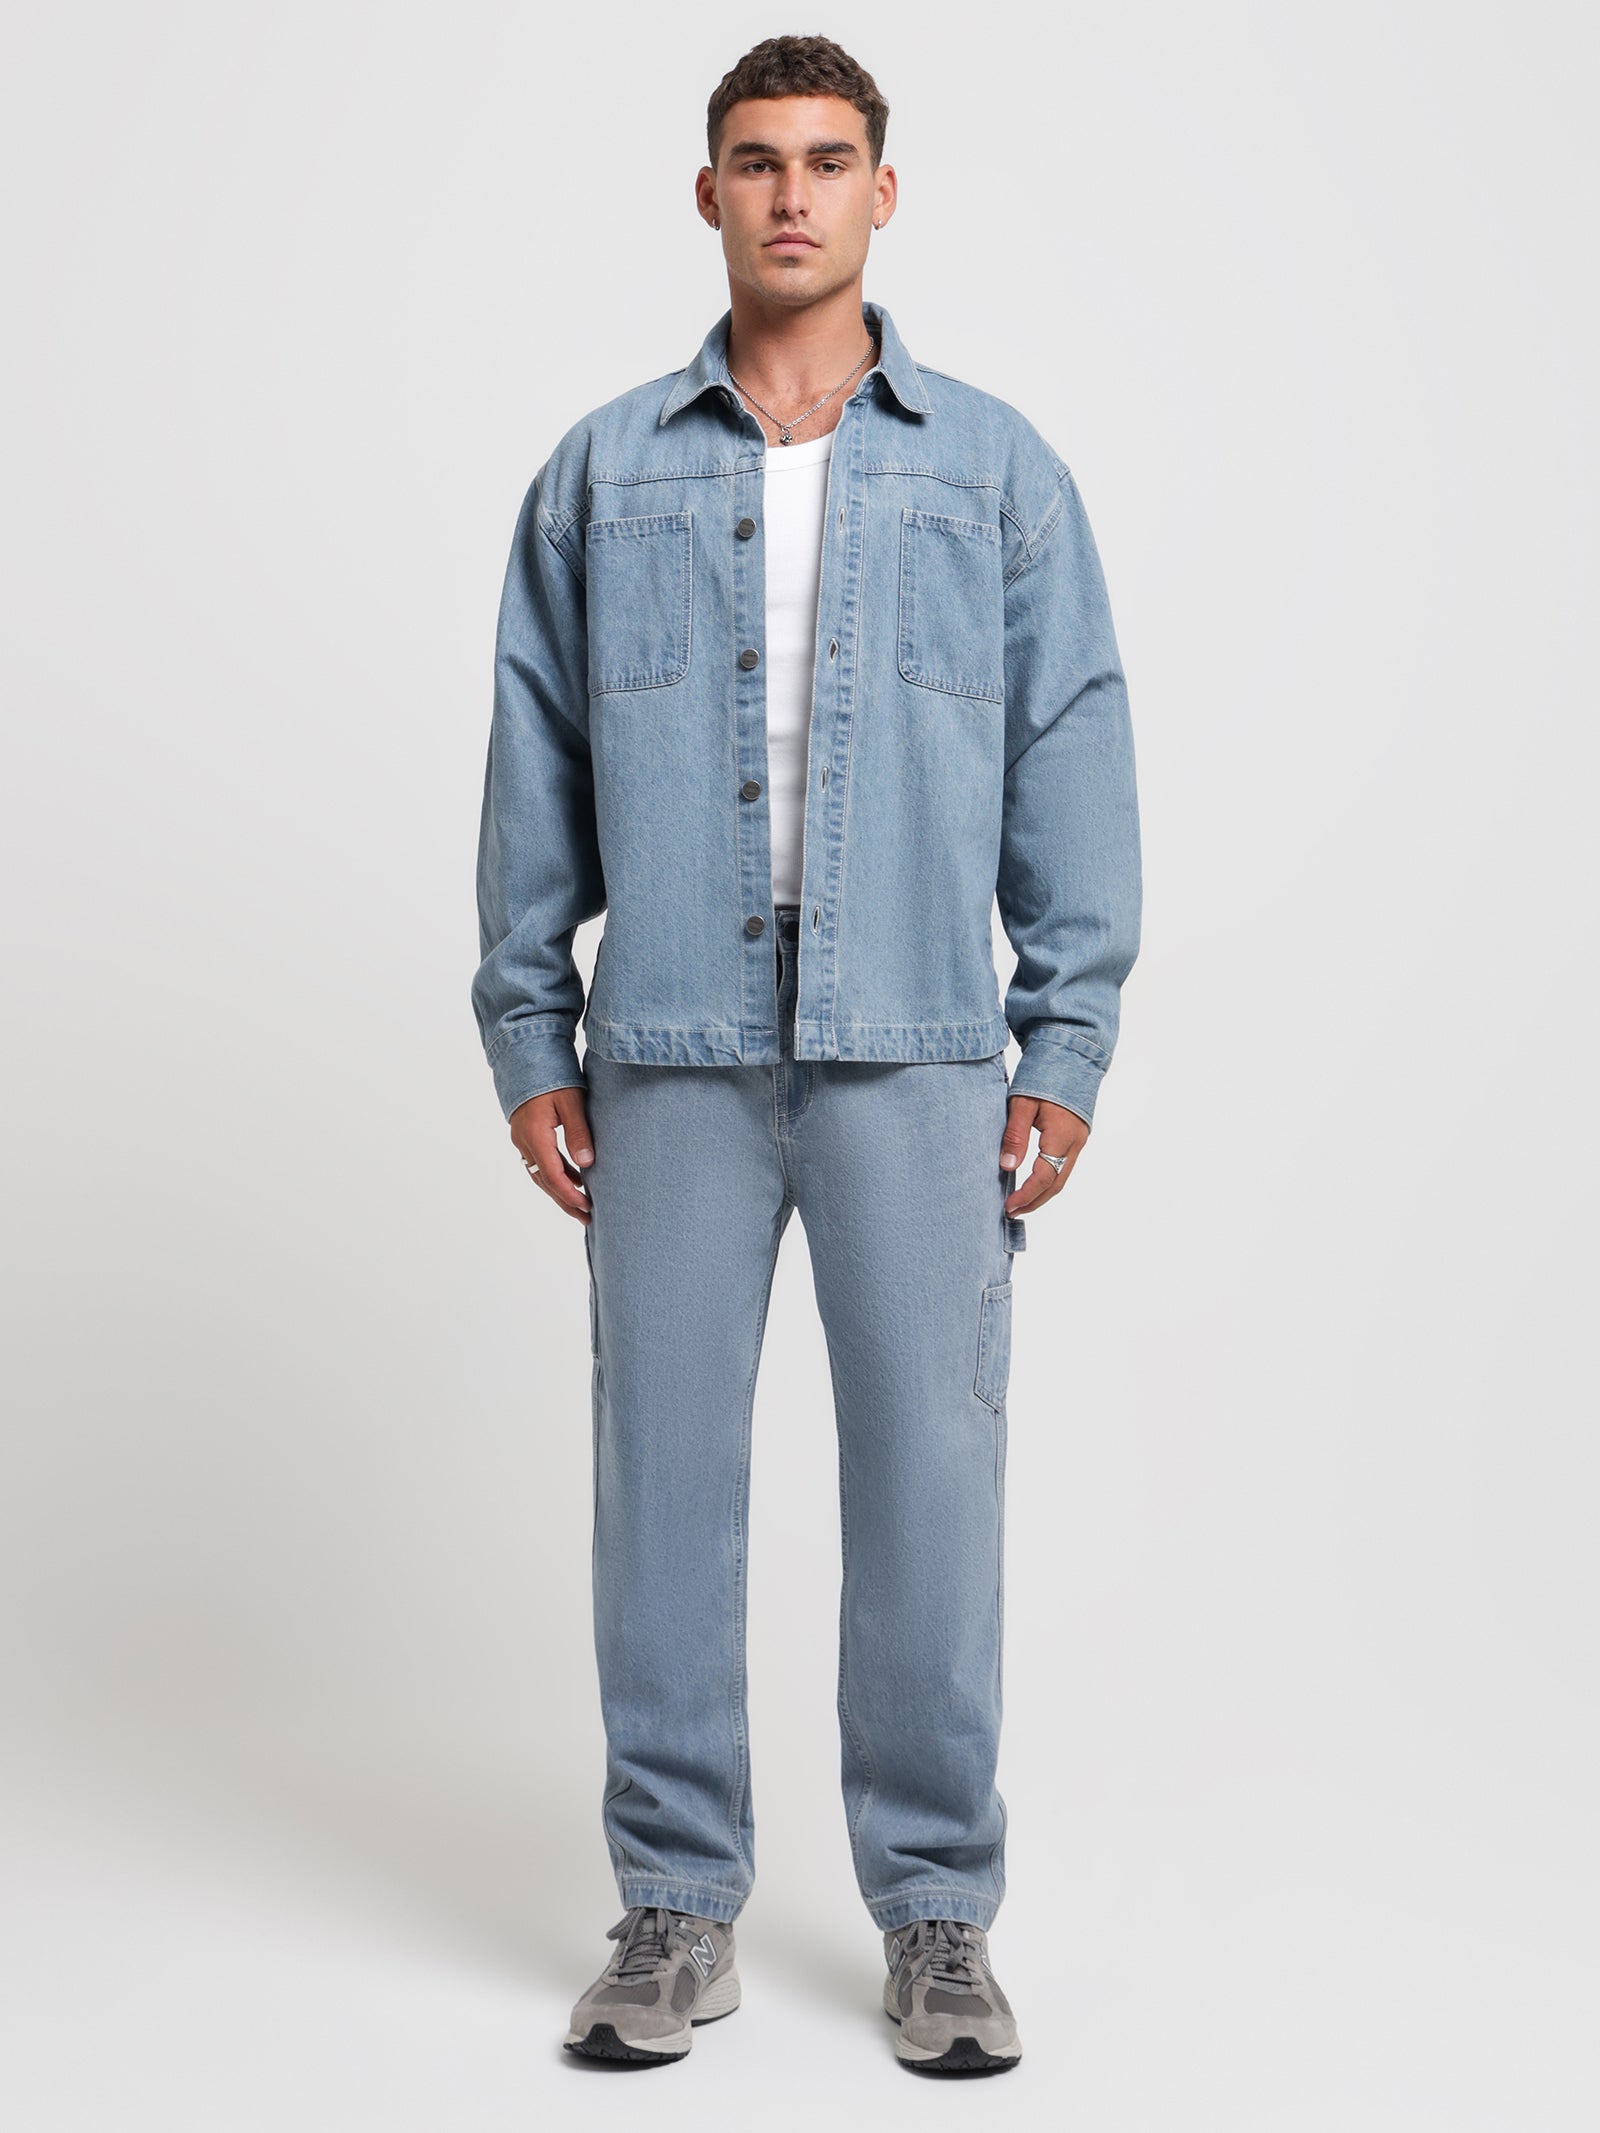 Denim Overshirt With All-Over Scritto Inside | Berluti US